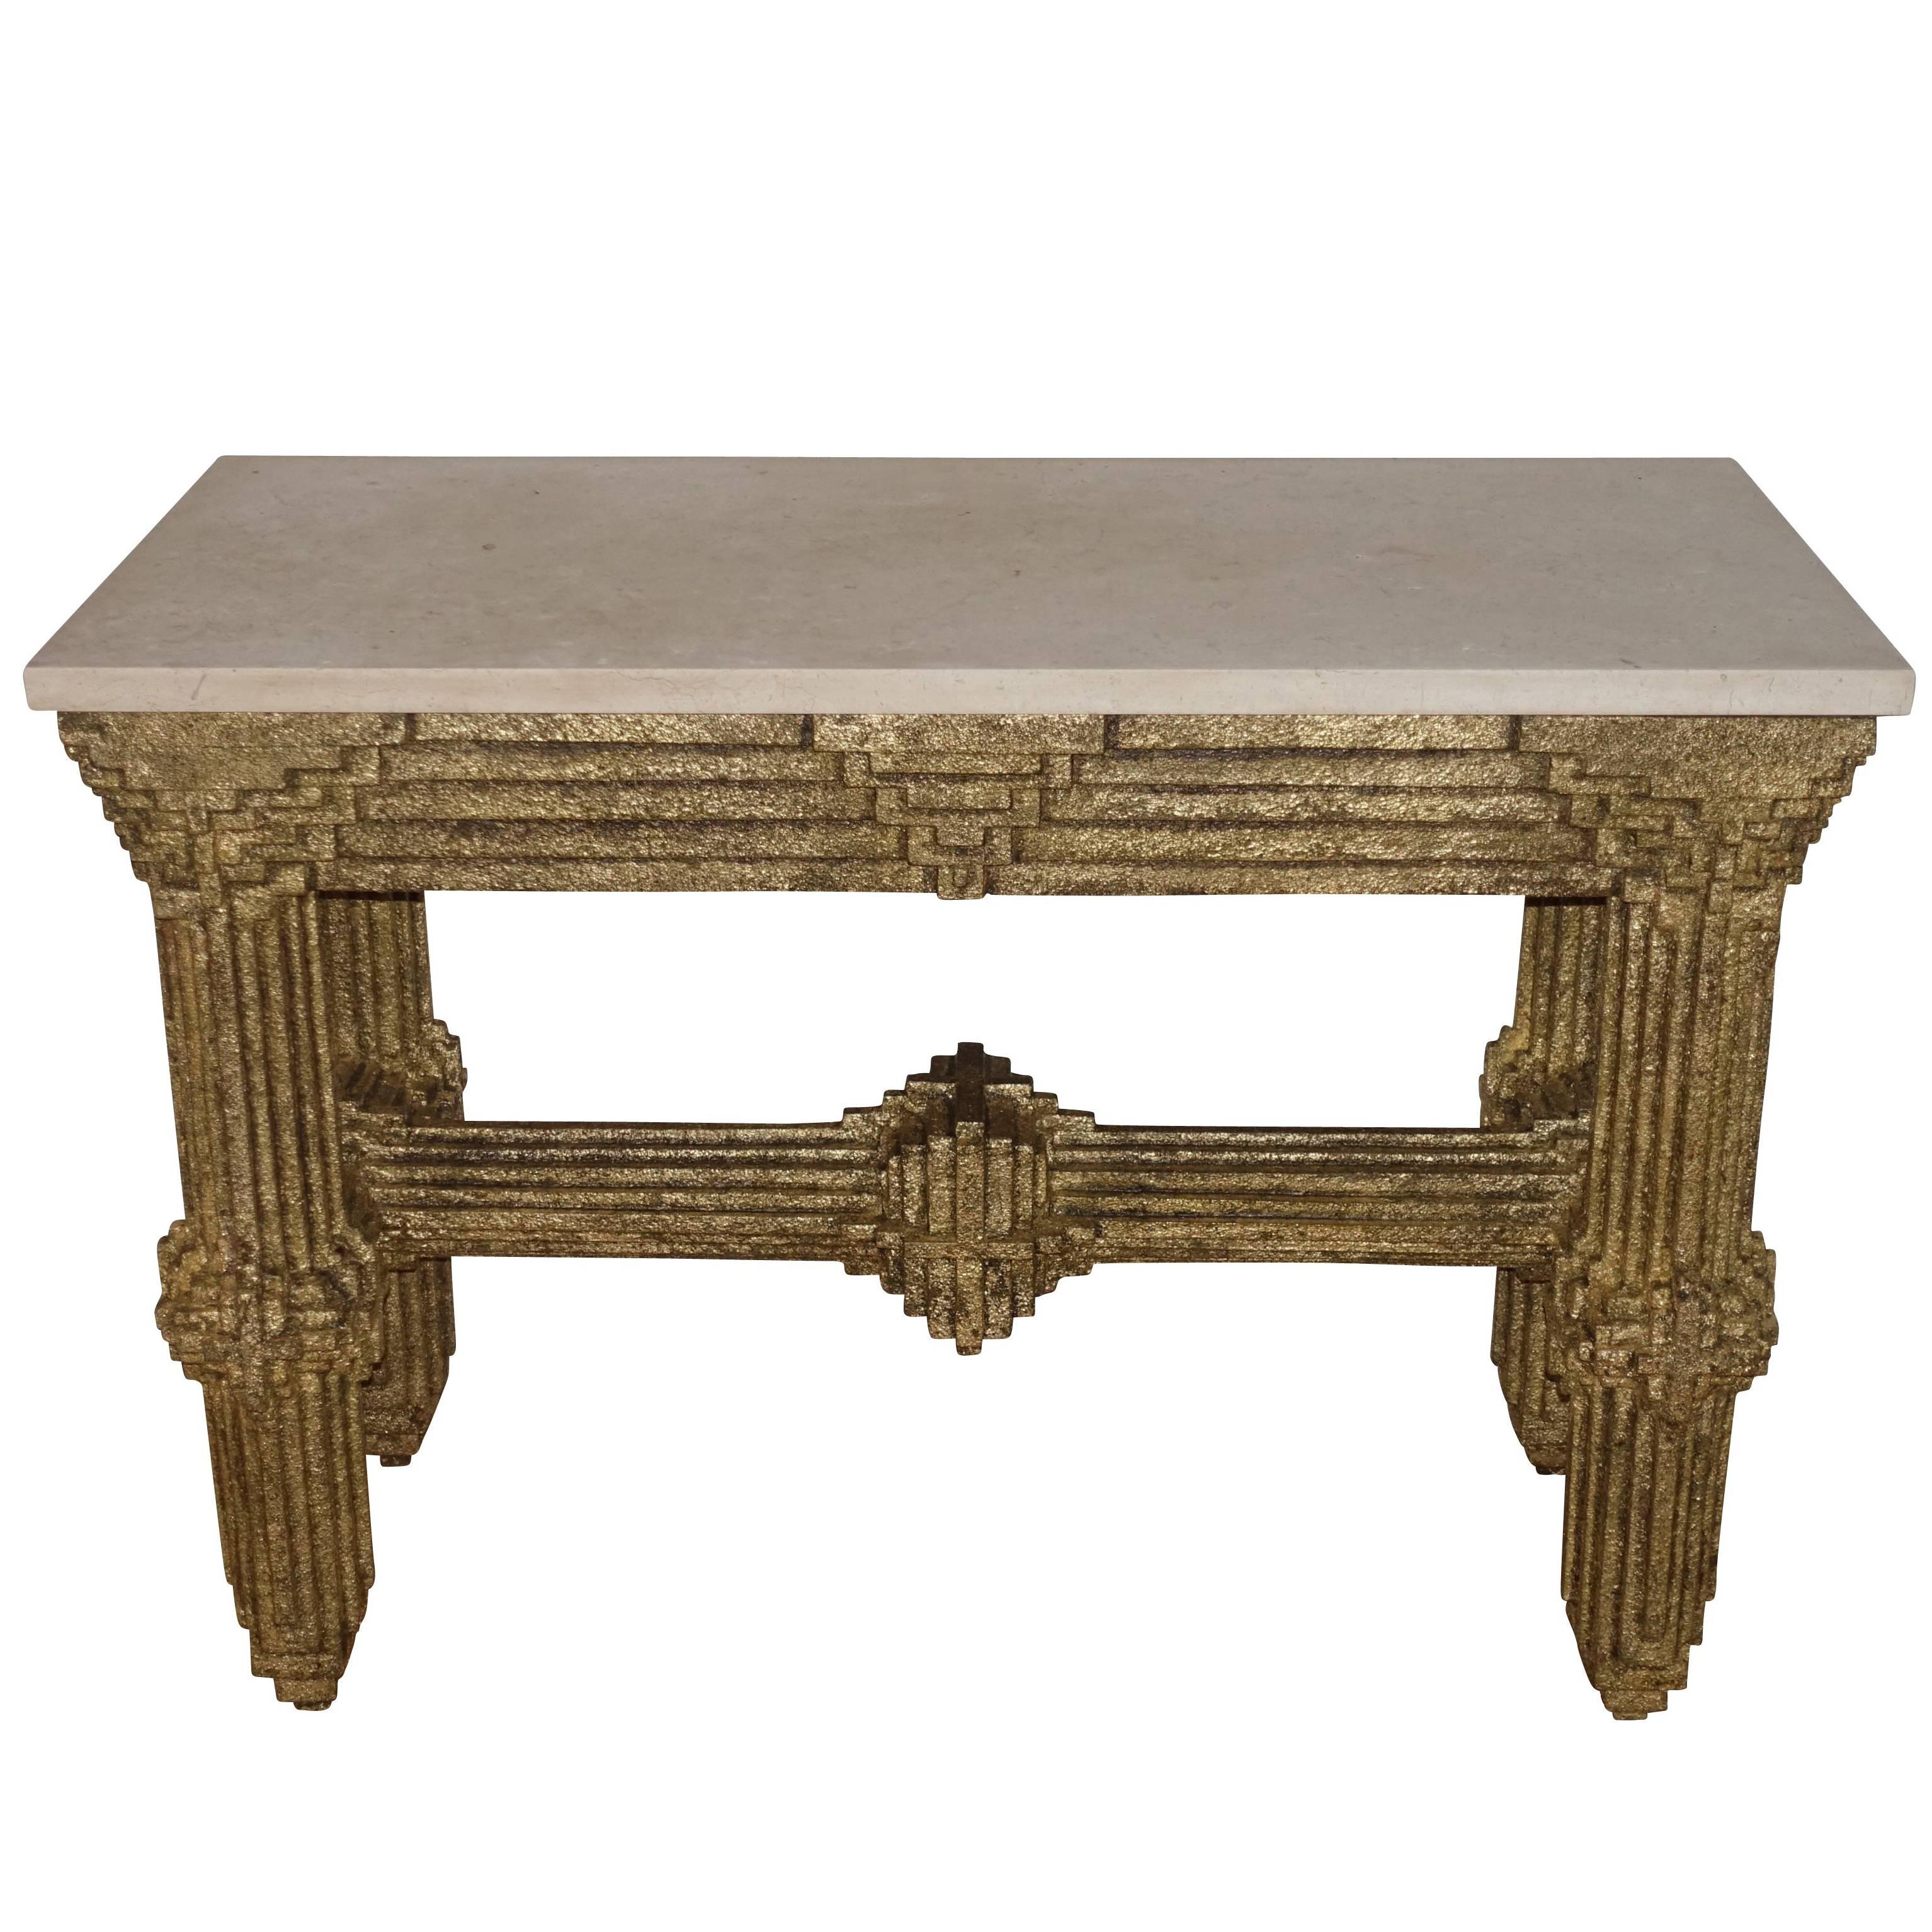 Gold Gilt Multi Layered Wood and Travertine Top Brutalist Console, France, 1950s